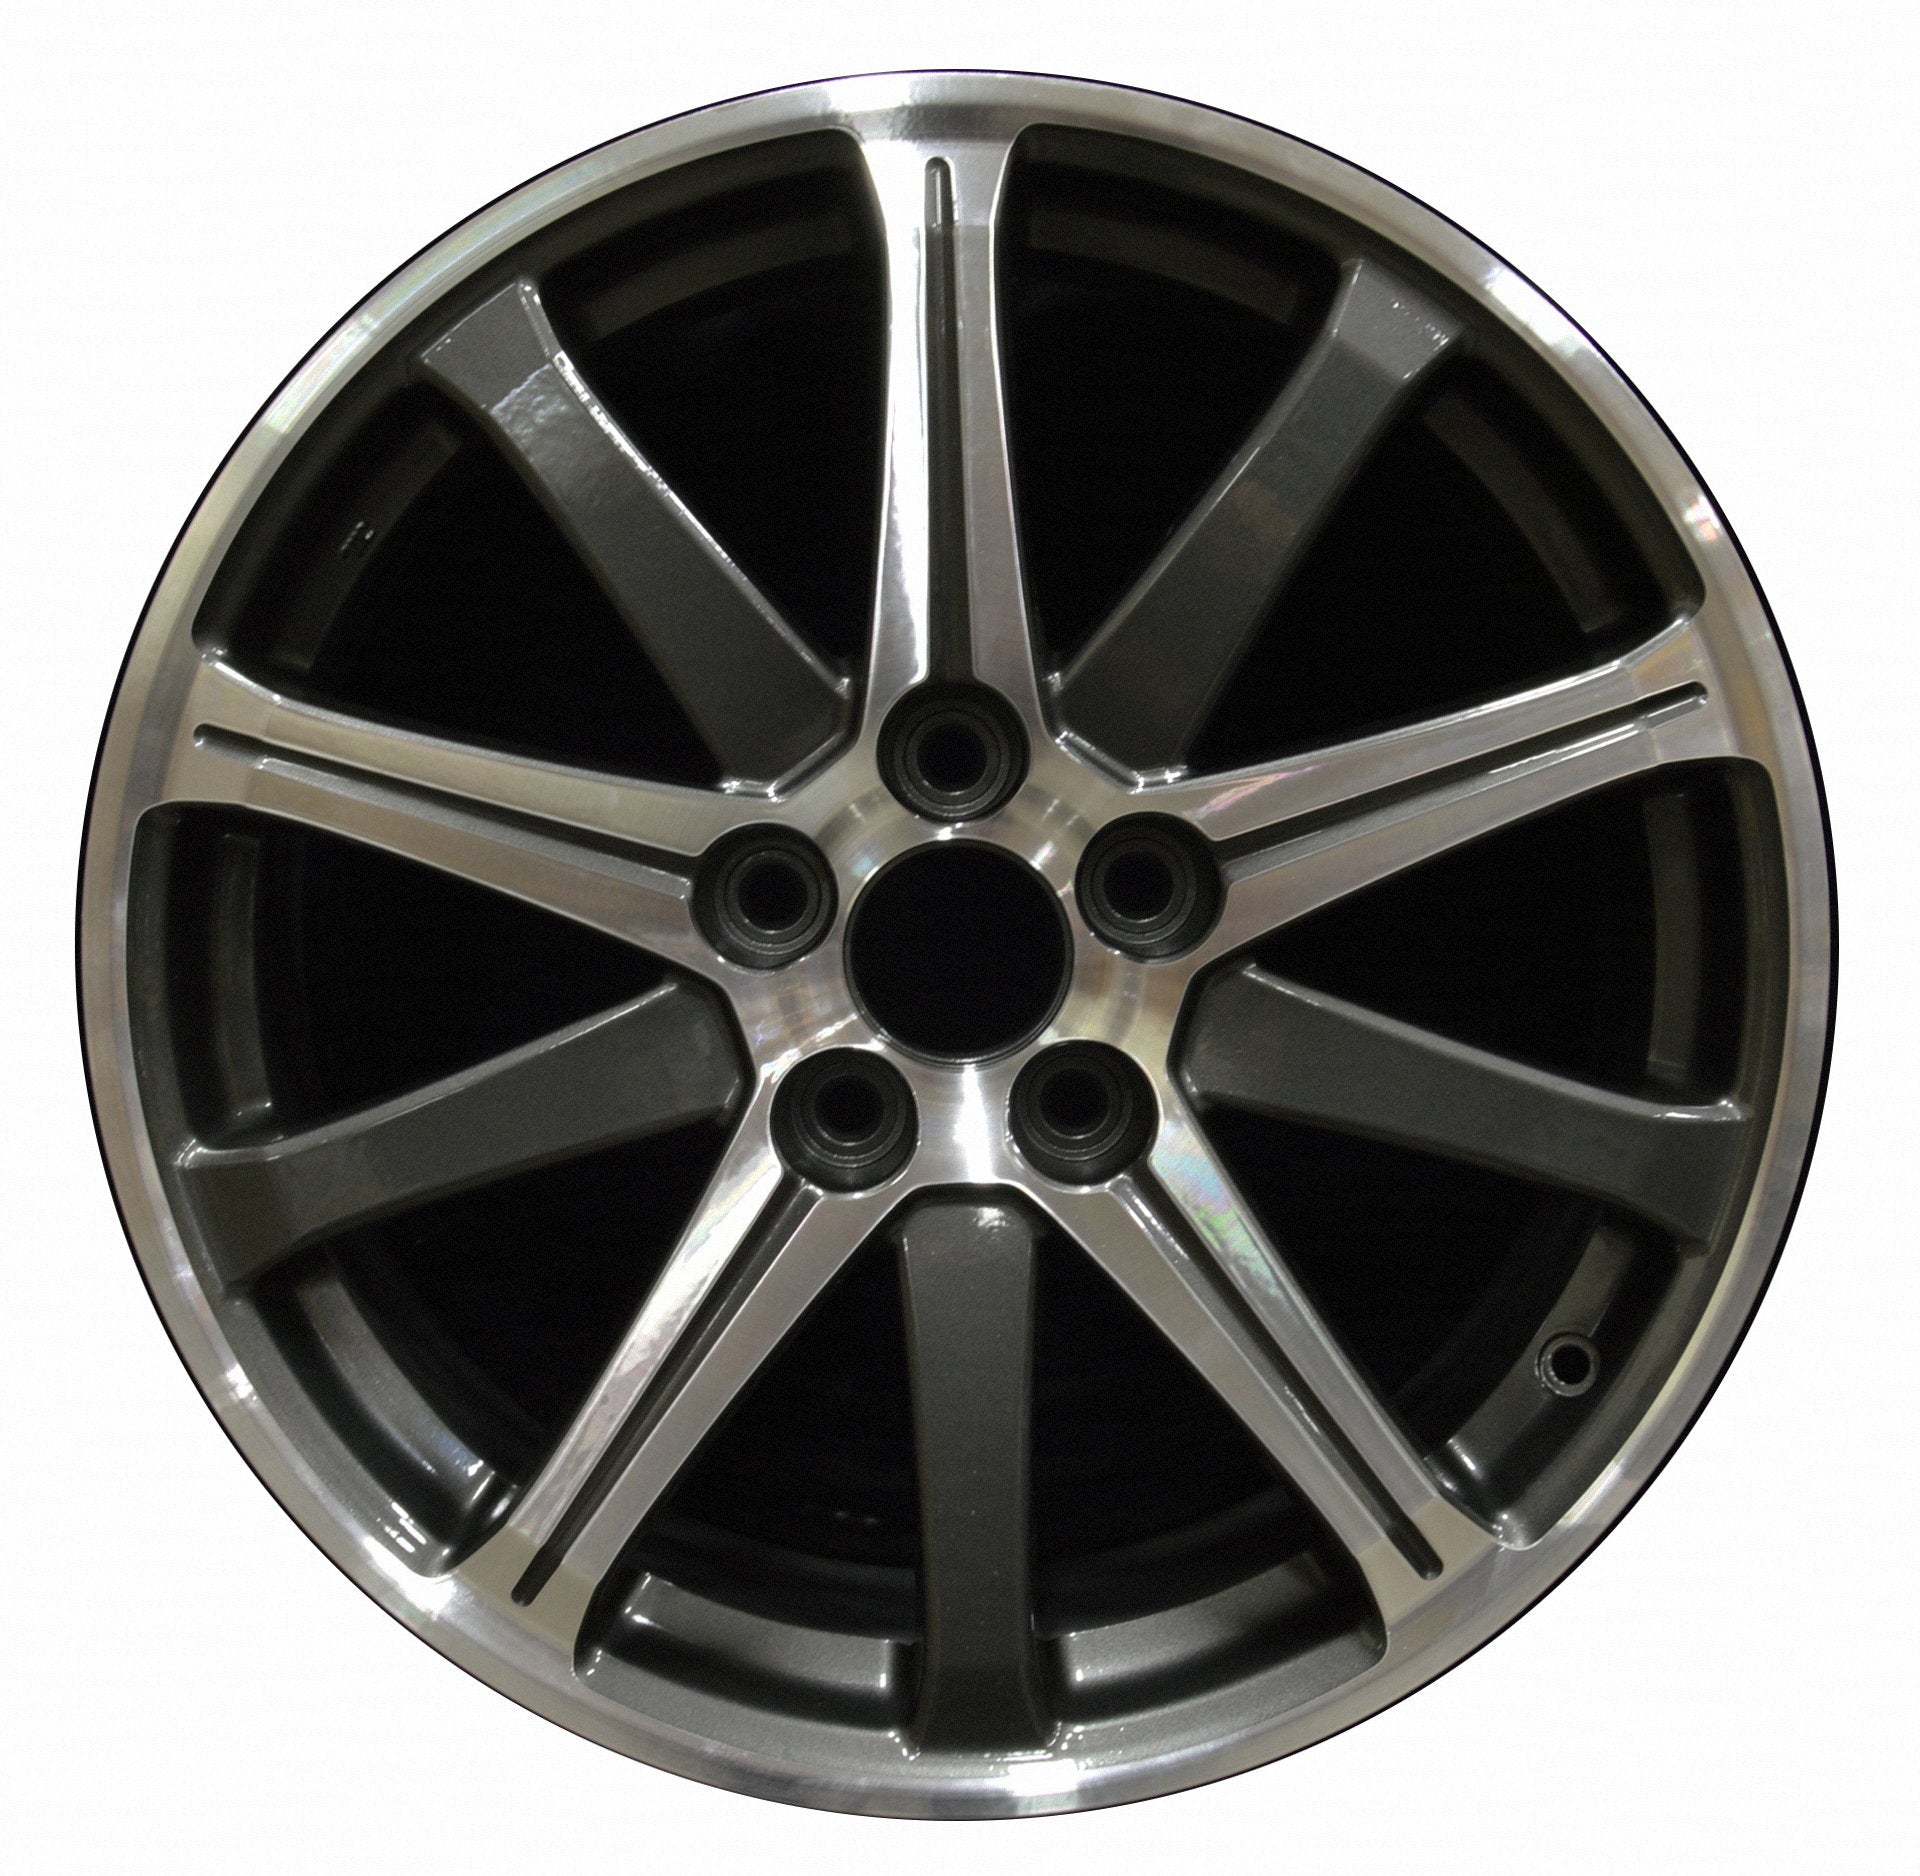 Acura TL  2009, 2010, 2011, 2012, 2013, 2014 Factory OEM Car Wheel Size 19x8 Alloy WAO.71787.LC32.MABRT